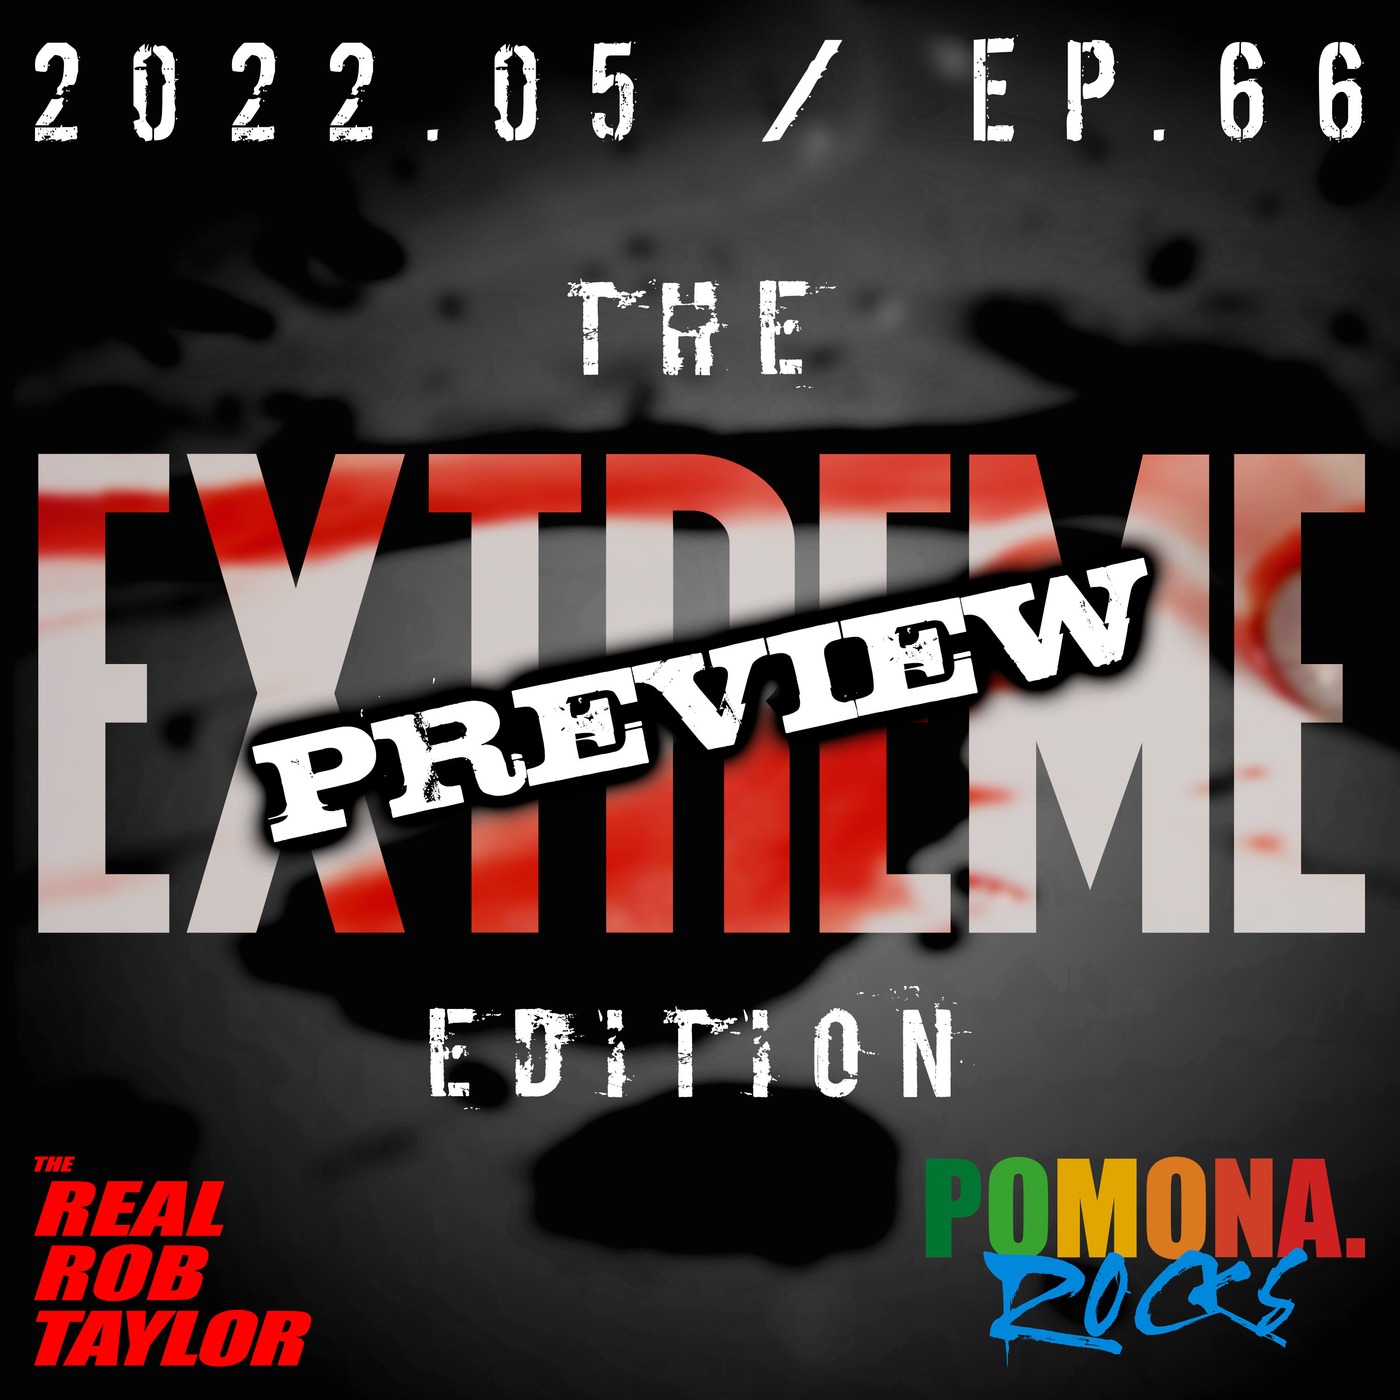 The EXTREME EDITION 2022.05 / Ep.66 PREVIEW EDITION